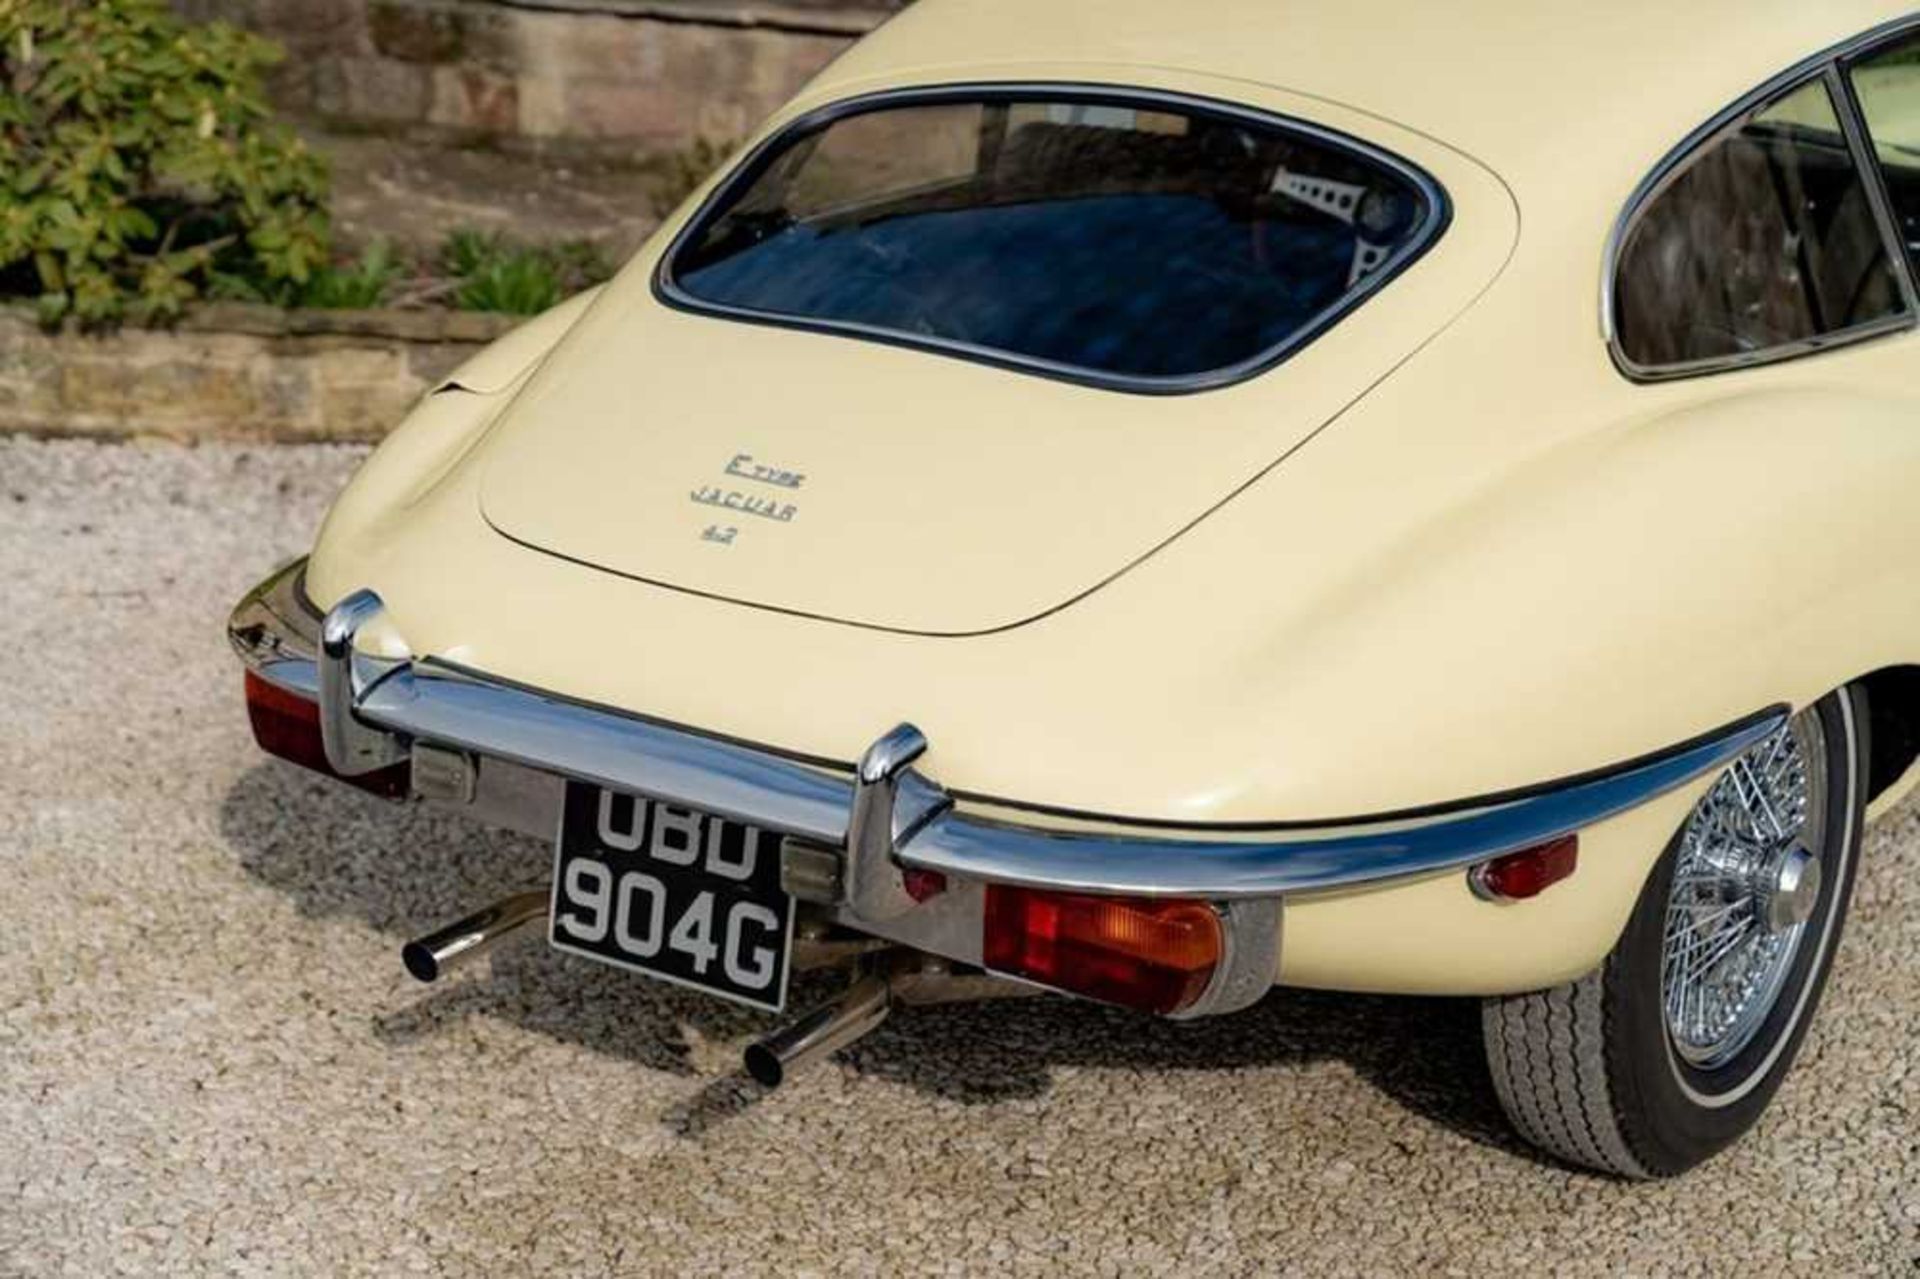 1968 Jaguar E-Type 4.2 Litre Coupe Genuine 44,000 miles from new - Image 3 of 68